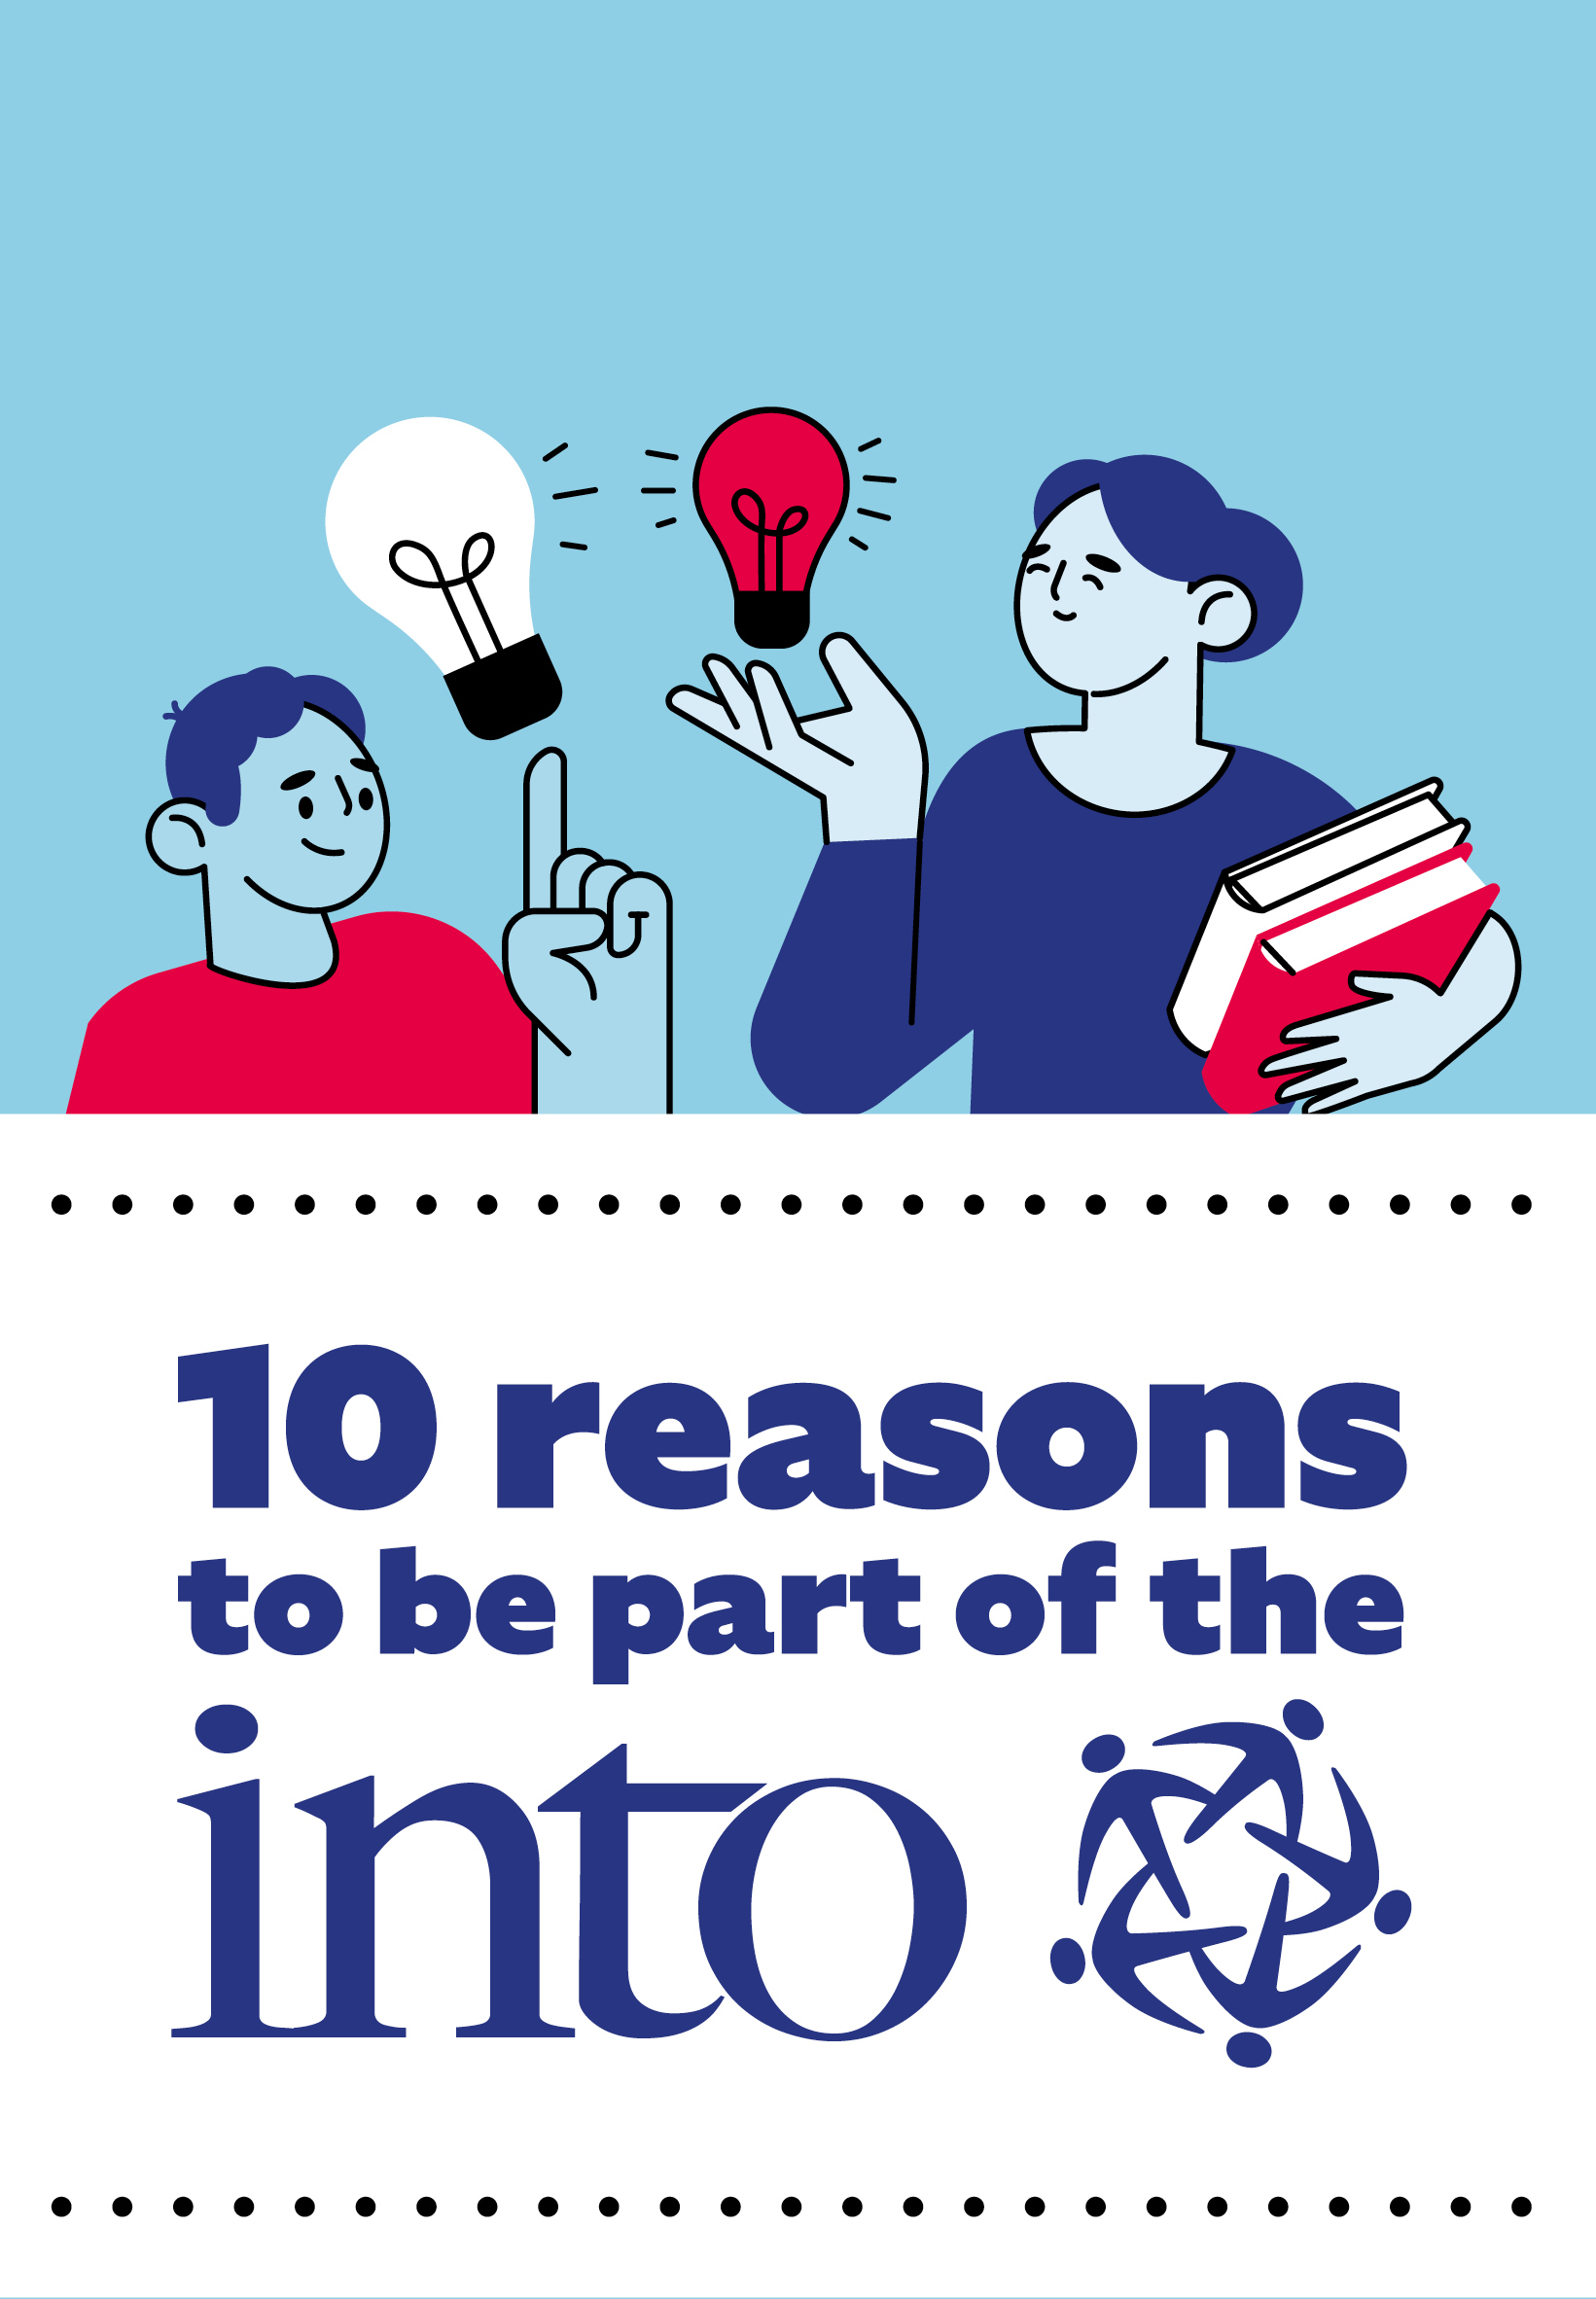 10 Reasons to be part of the INTO